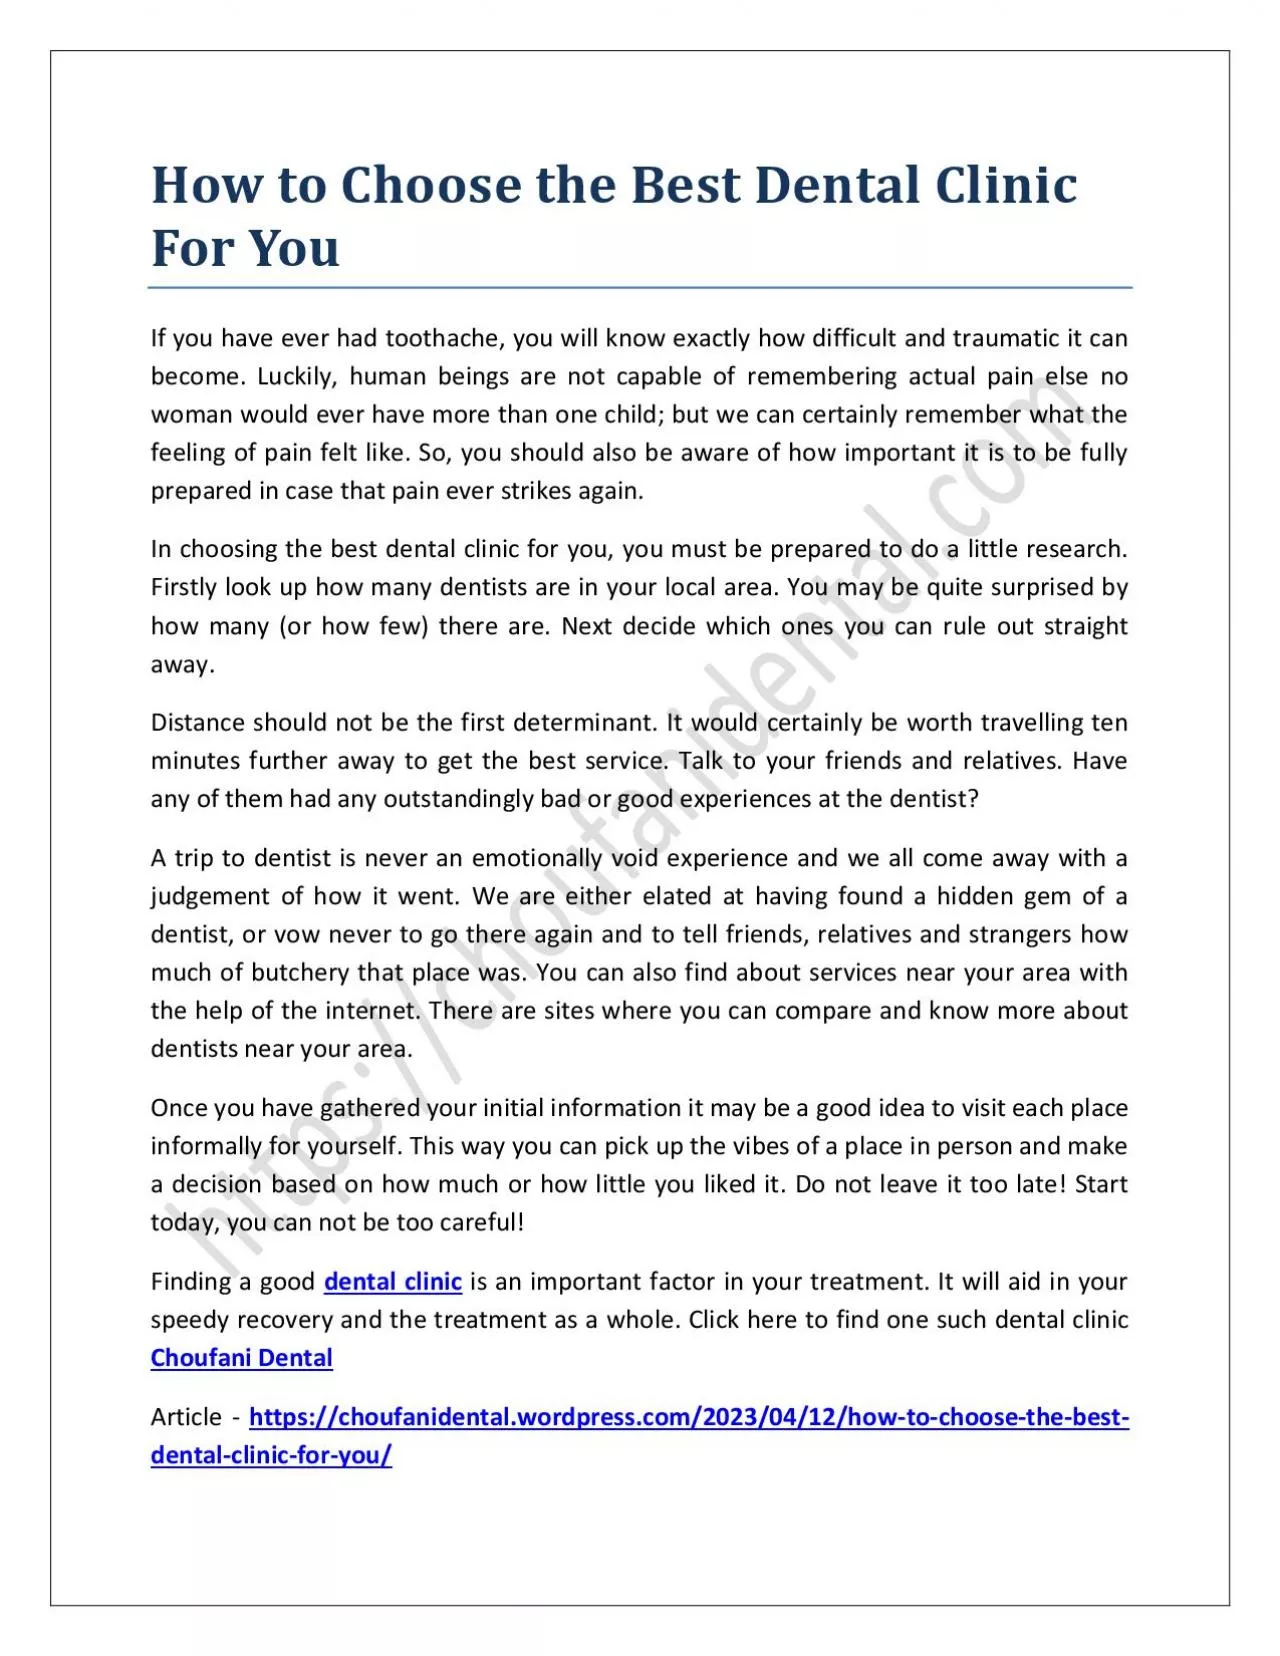 How to Choose the Best Dental Clinic For You